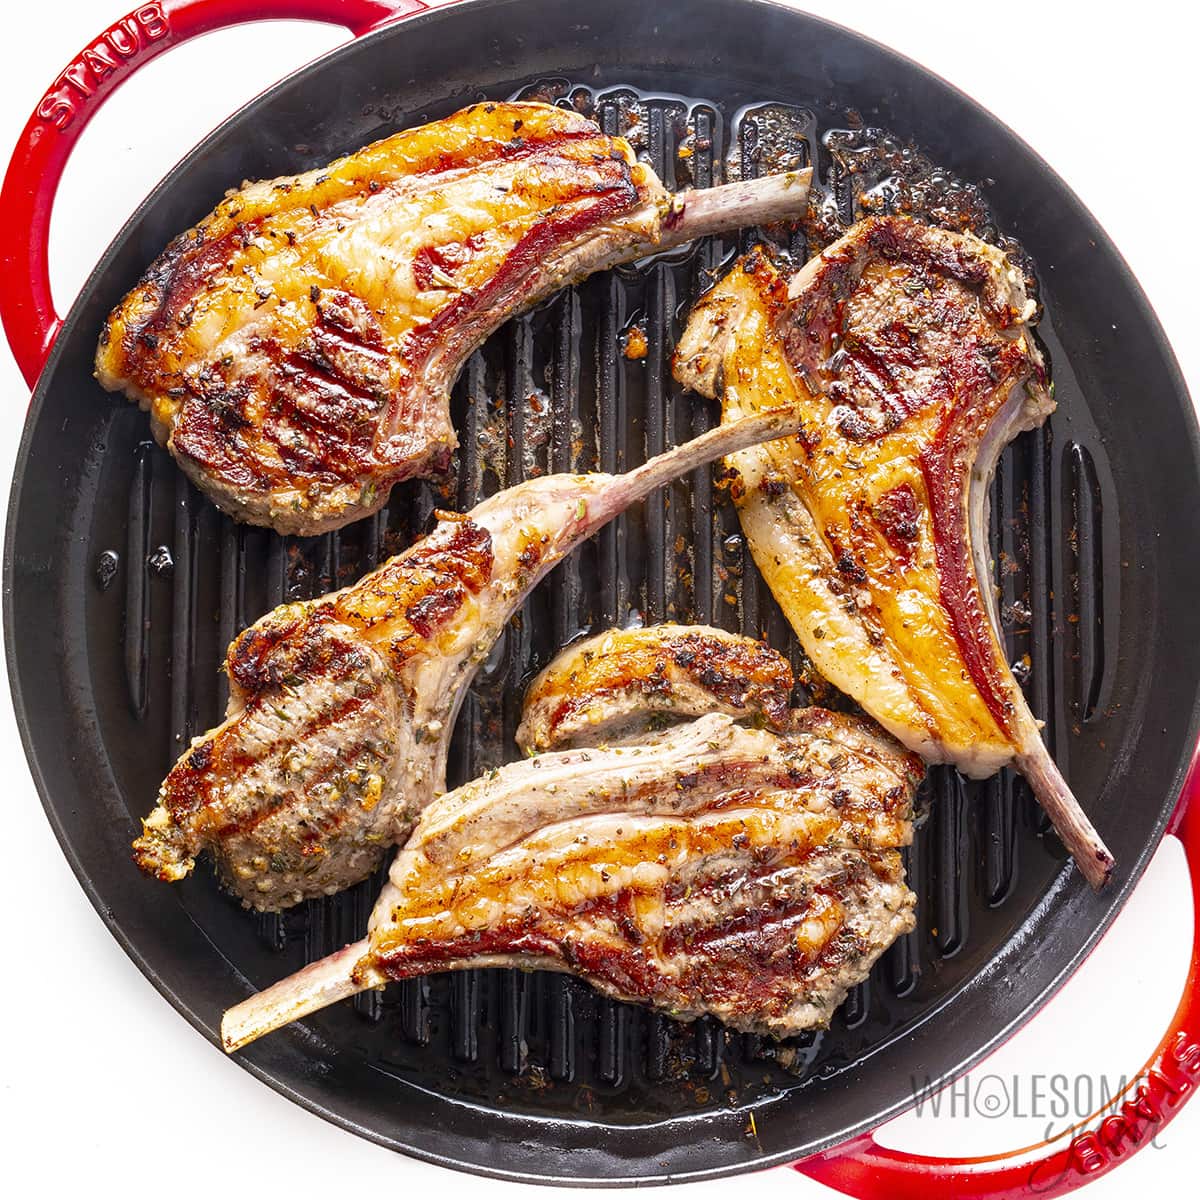 Lamb chops seared on a cast iron skillet.